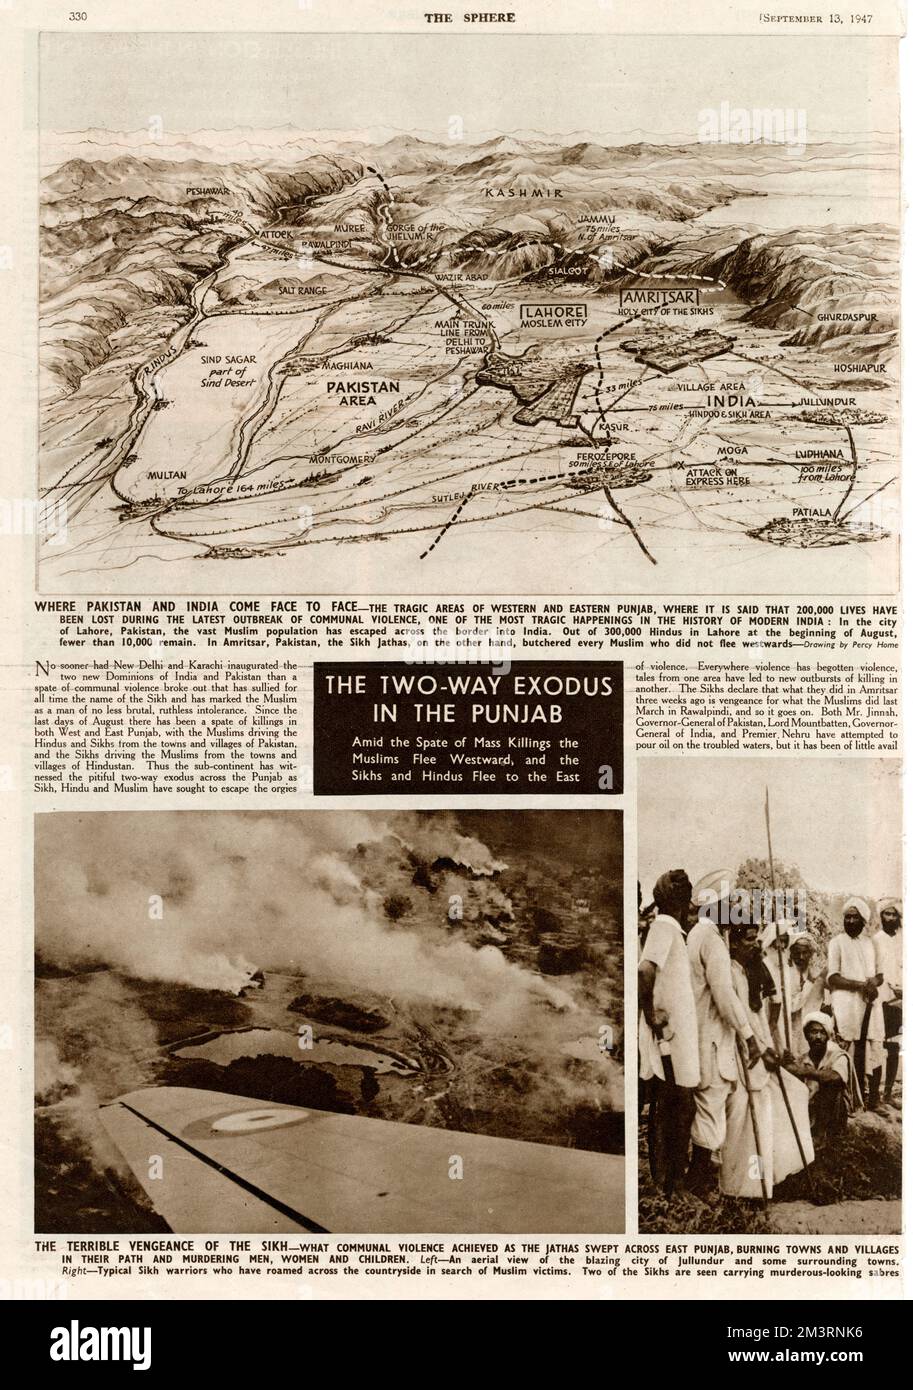 Page from The Sphere magazine reporting on the devastating consquences of partition in India in 1947.  Top illustration shows points of violence in East and West Punjab.  Bottom left picture shows an aerial view of the burning town of Jullundur and surrounding villages in East Punjab.  Bottom right image shows Sikh Jathas with weapons.     Date: 1947 Stock Photo